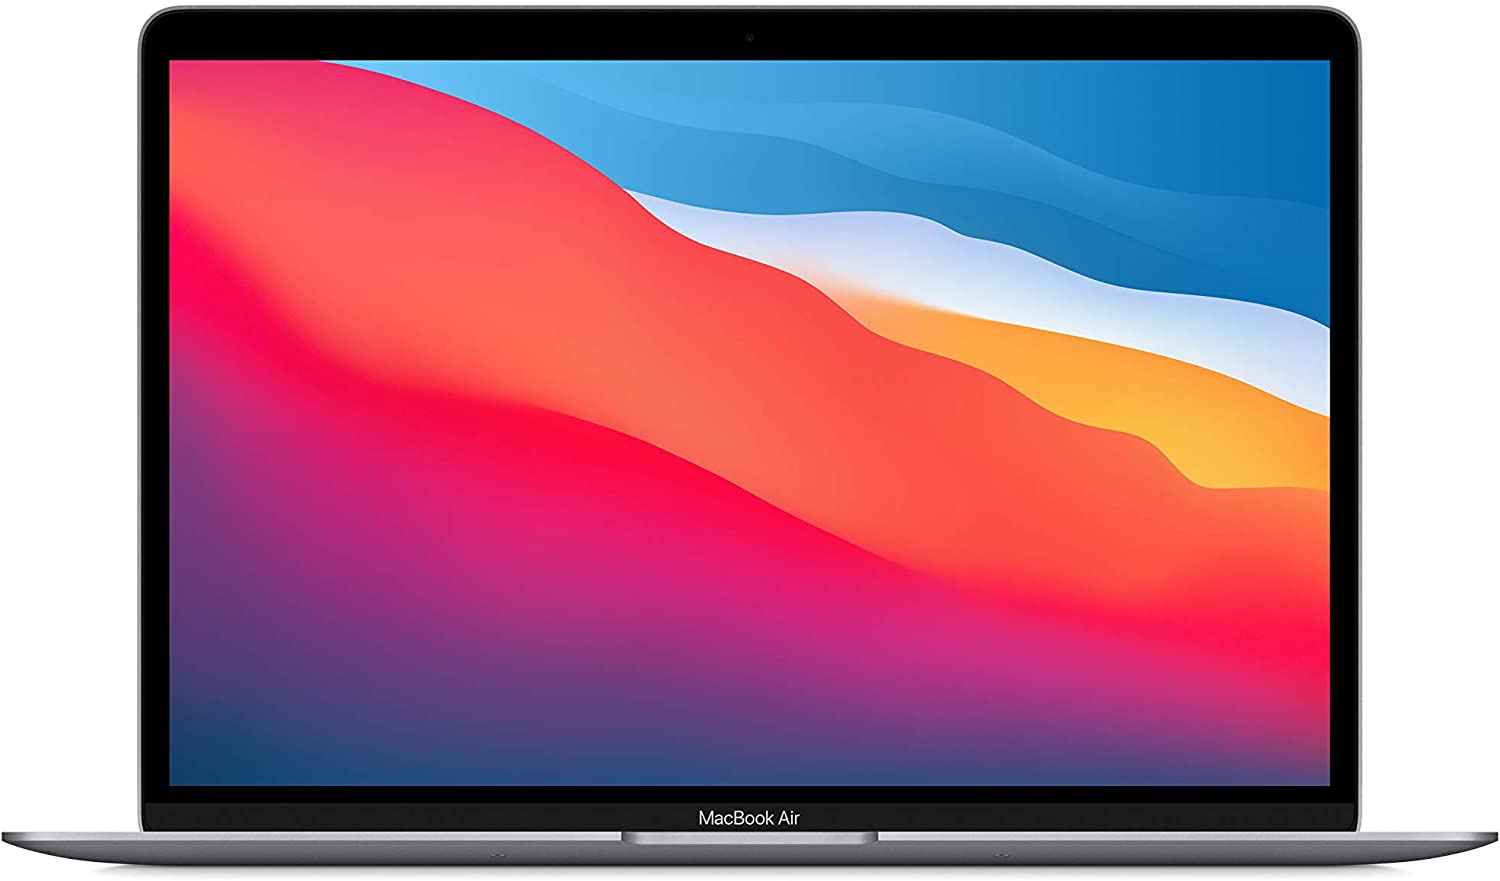 The NetDigz Editors rate the Apple MacBook Air as the Best Apple Laptop for College.